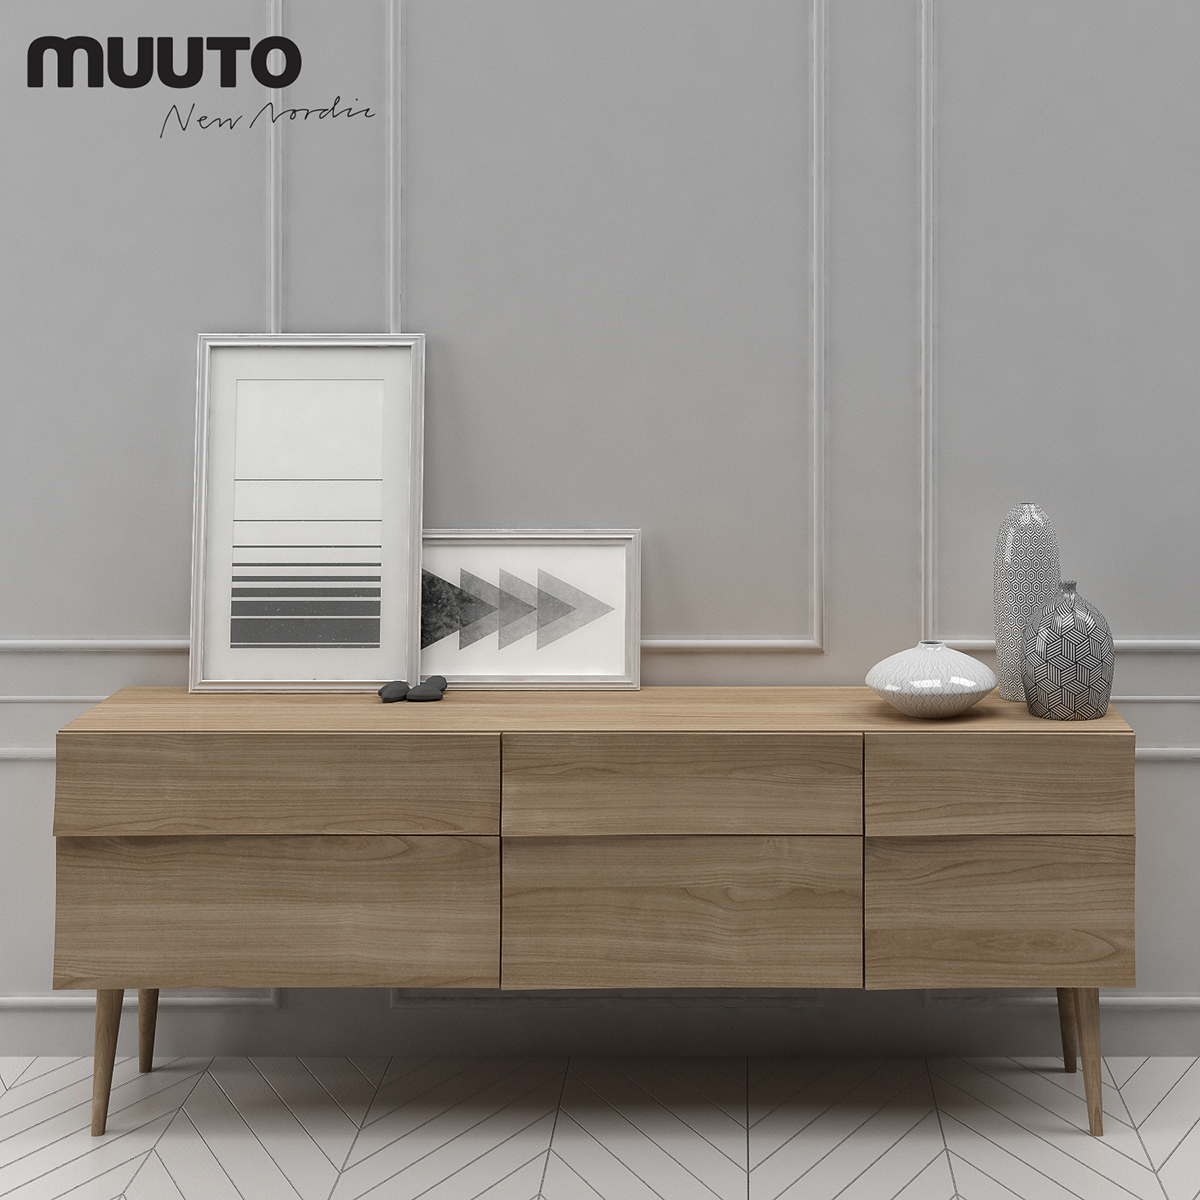 3D model download Muuto sideboard chest of drawers 3D model